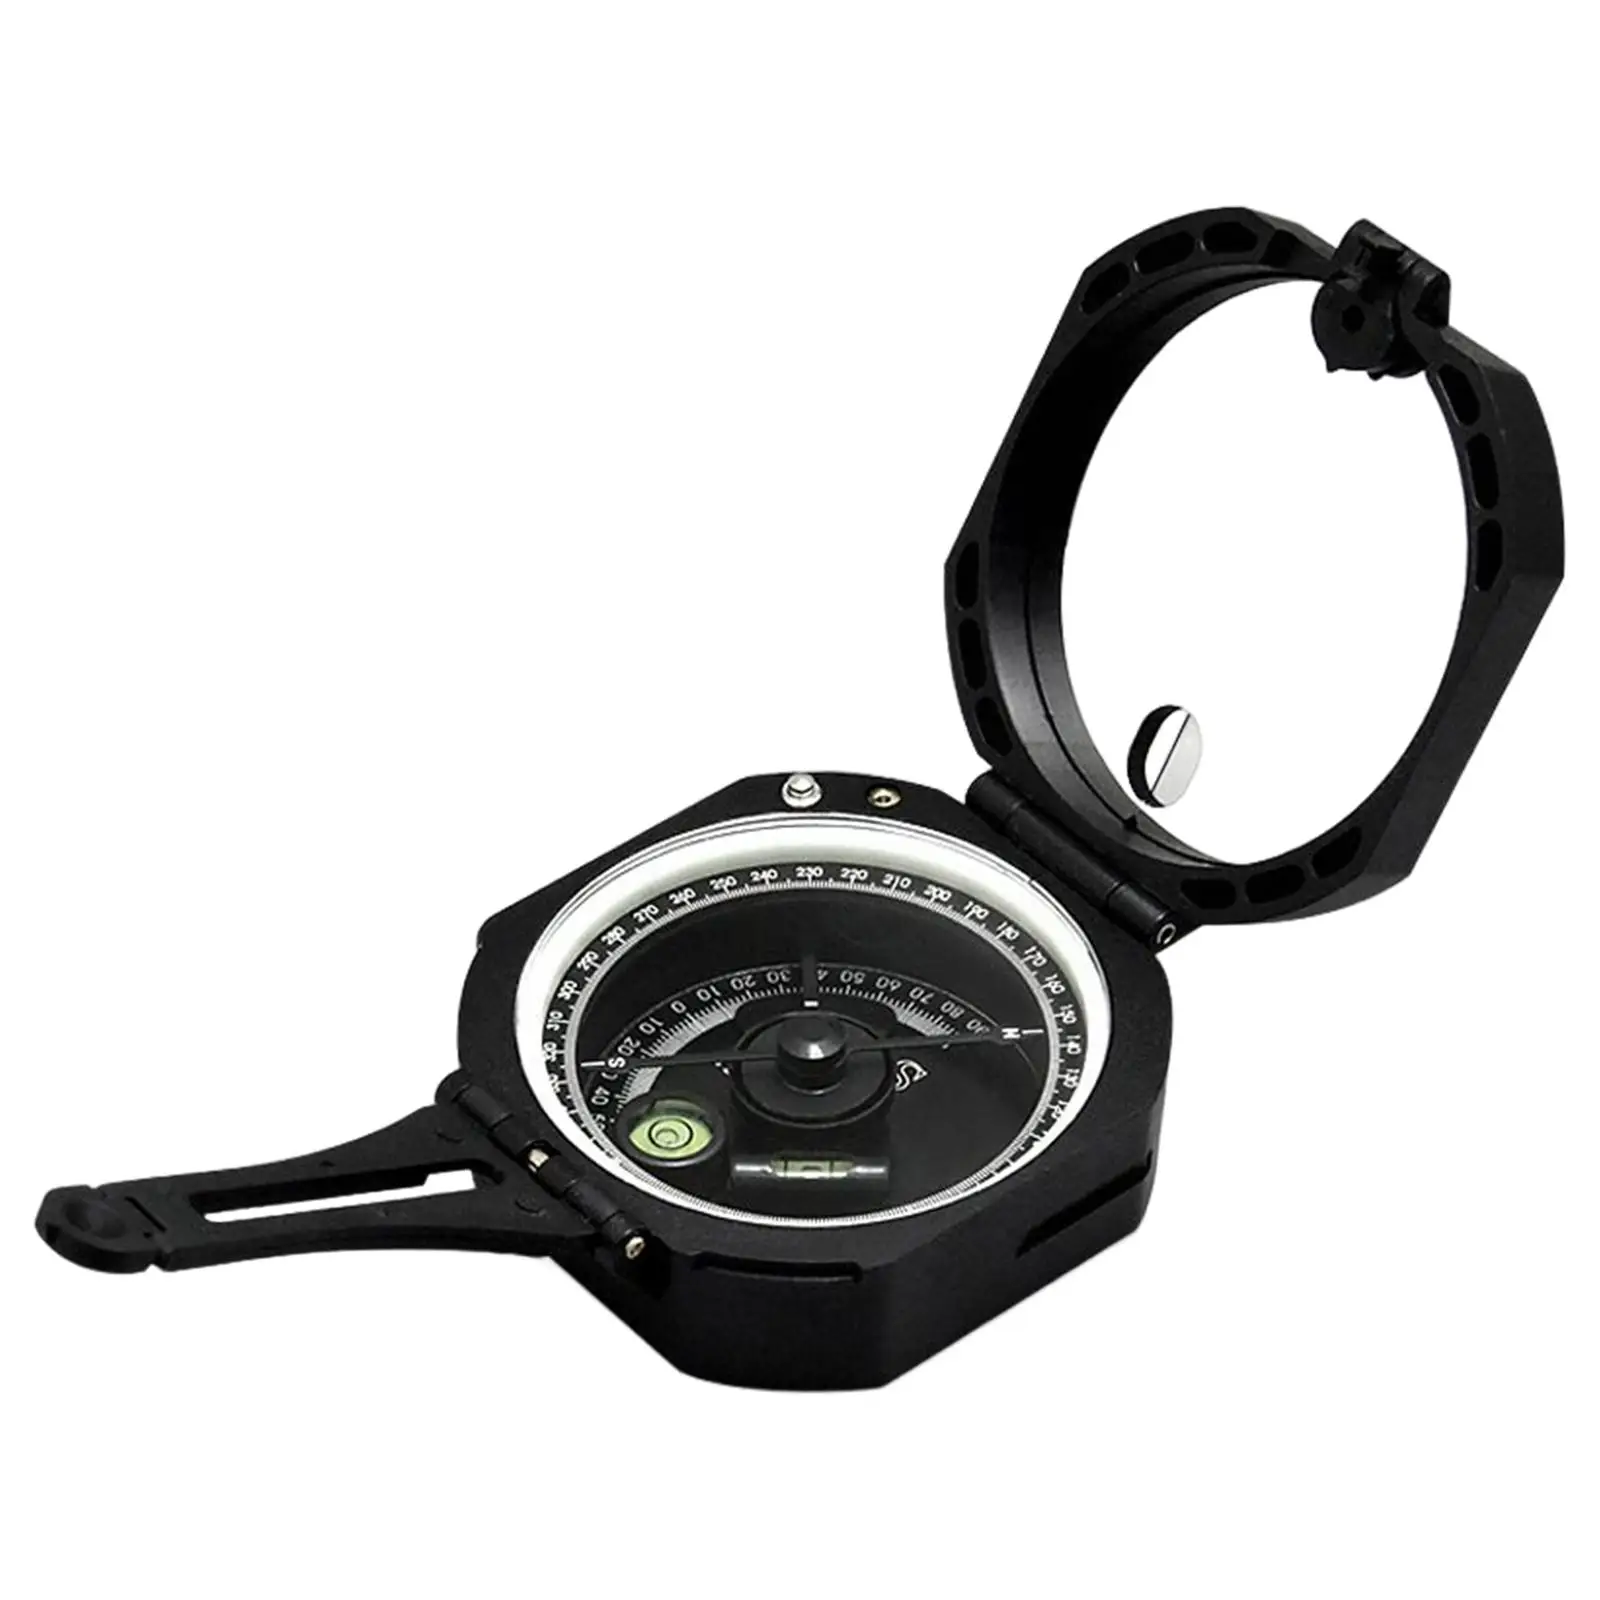 Professional Geology Compass Transit Compass Navigation with Mirror Pocket for Camping Outdoor Activities Surveyors Equipment